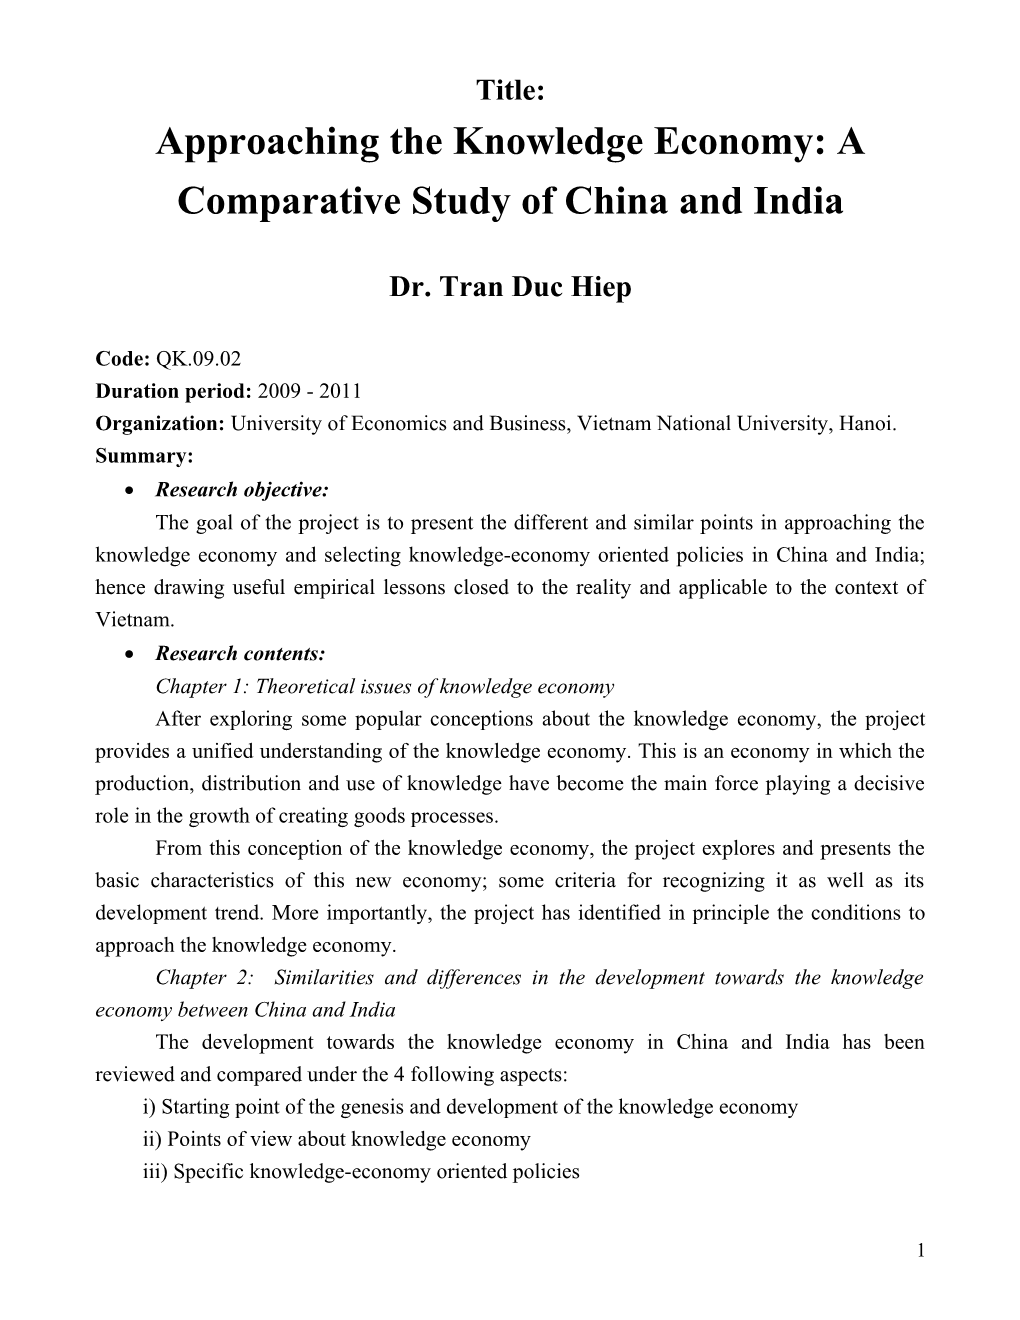 Approaching the Knowledge Economy: a Comparative Study of China and India